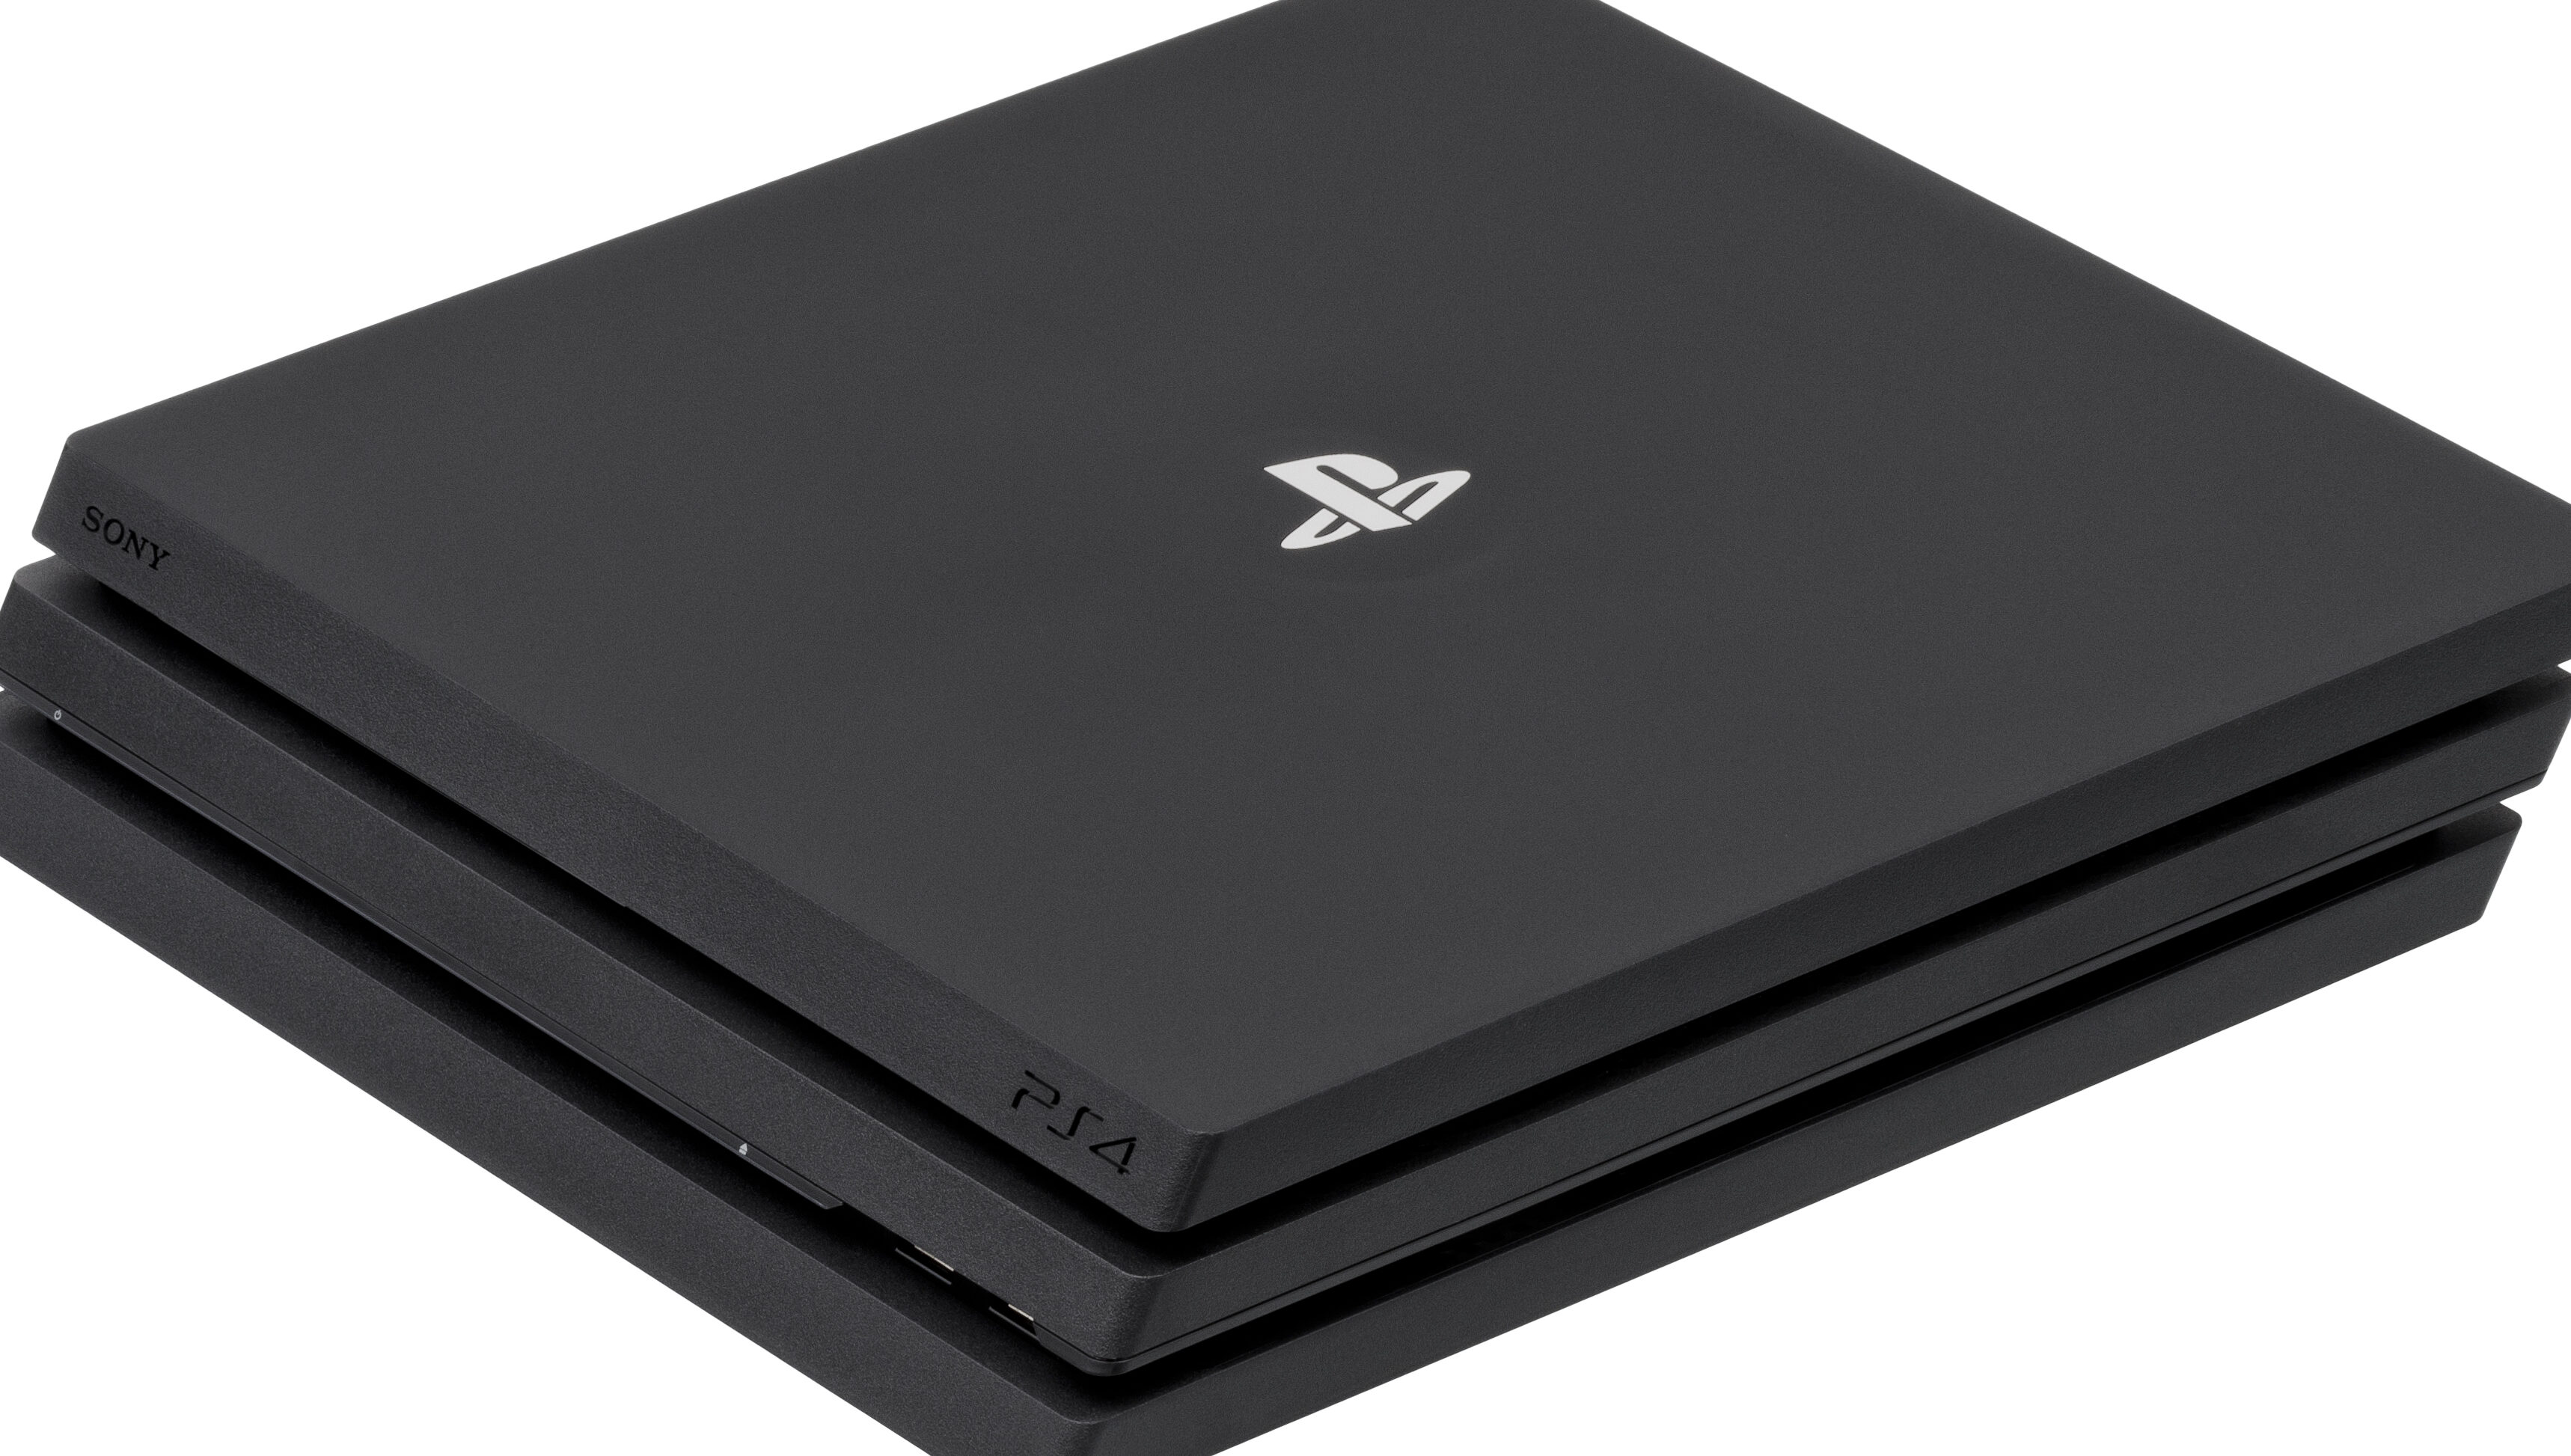 Sony has decided to keep making PS4 due to PS5 shortages, it’s claimed - Video Games Chronicle